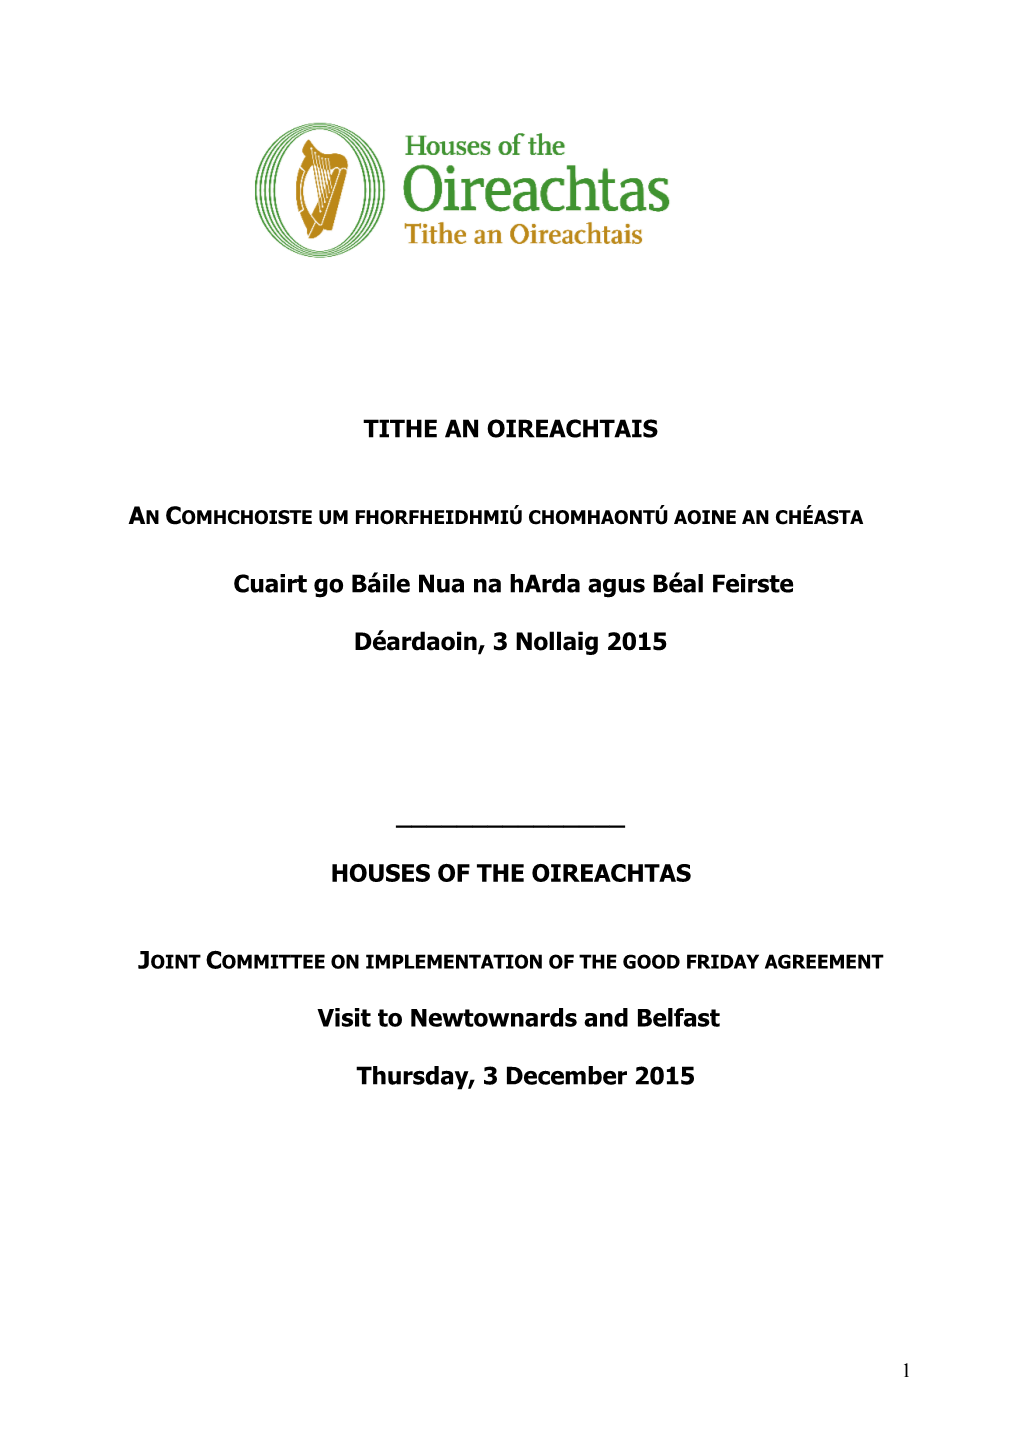 Report on Visit to Newtownards and Belfast